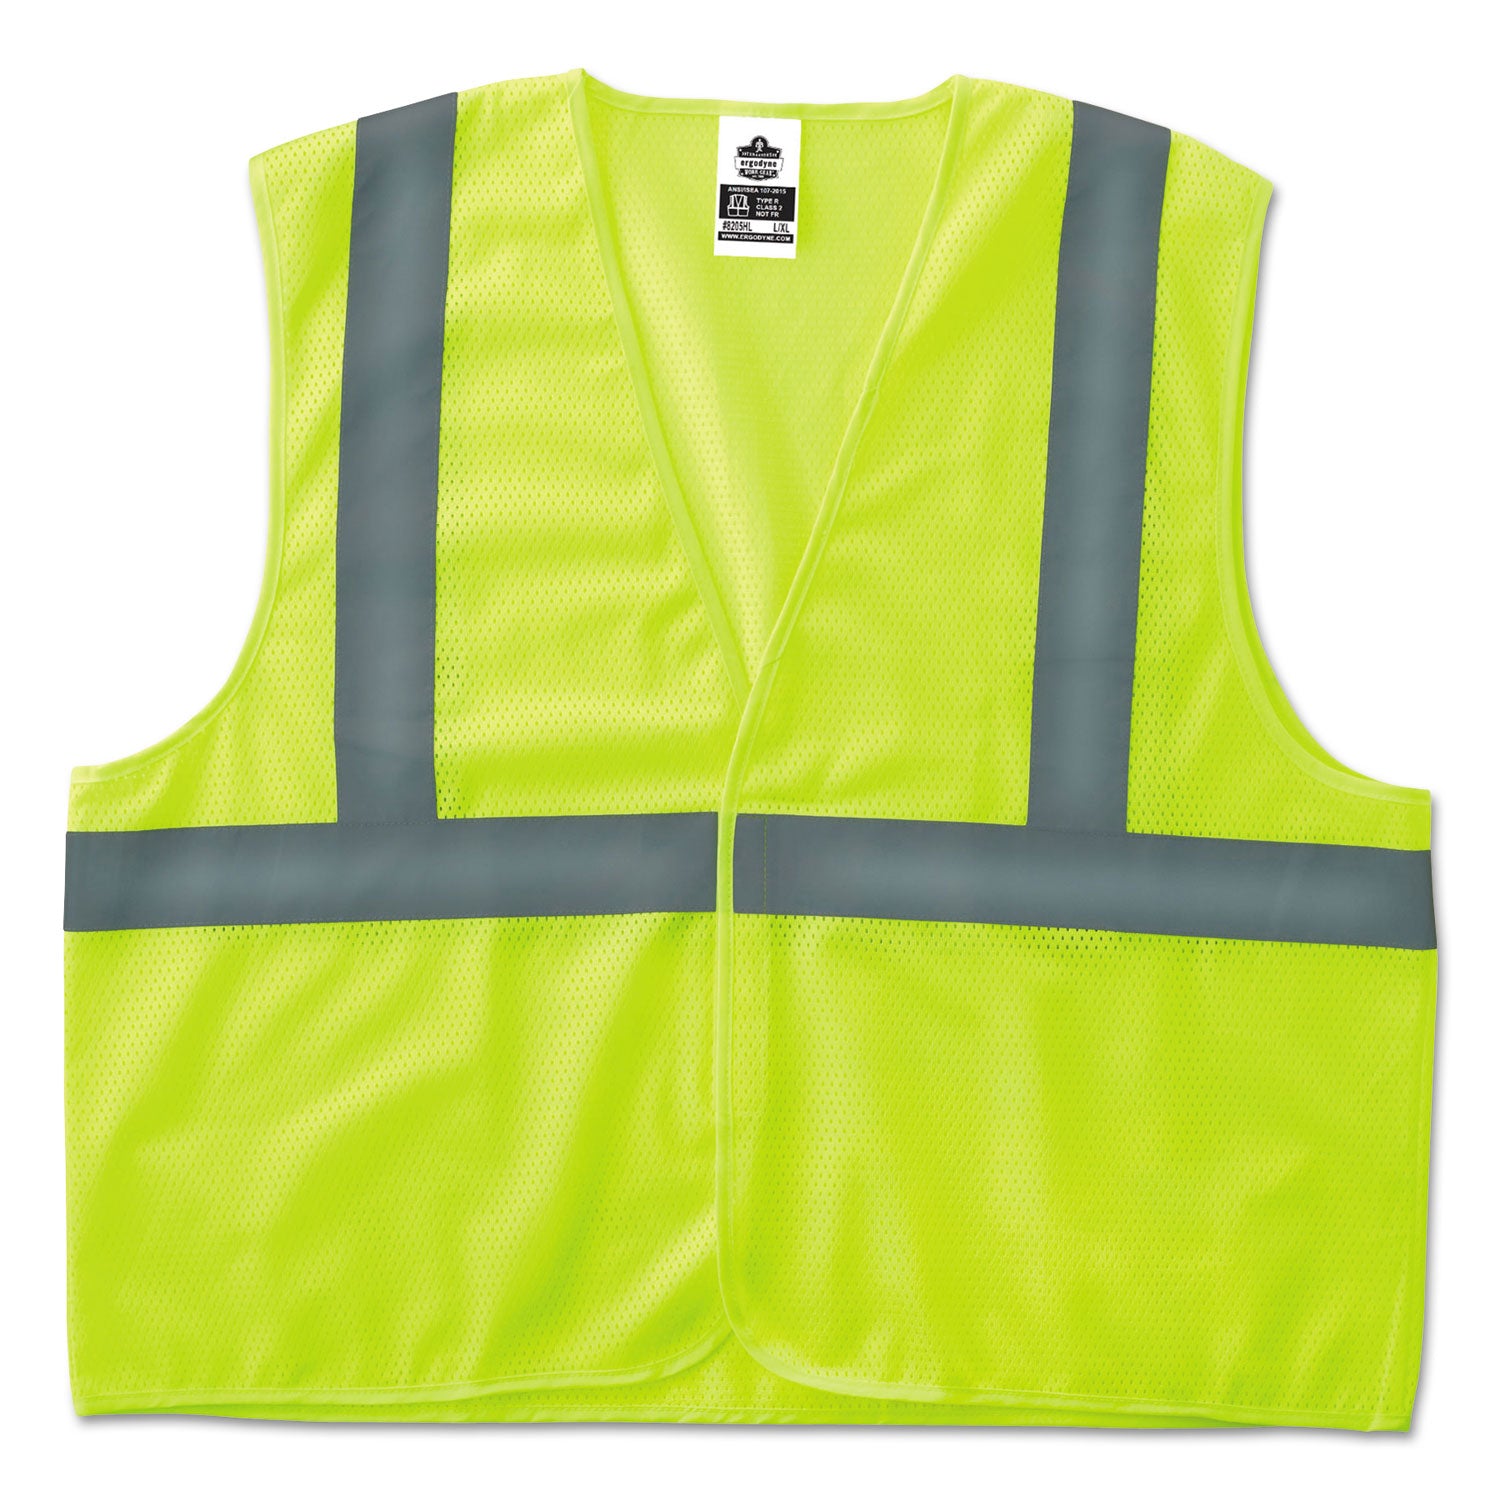 glowear-8205hl-type-r-class-2-super-econo-mesh-safety-vest-4x-large-to-5x-large-lime_ego20979 - 2